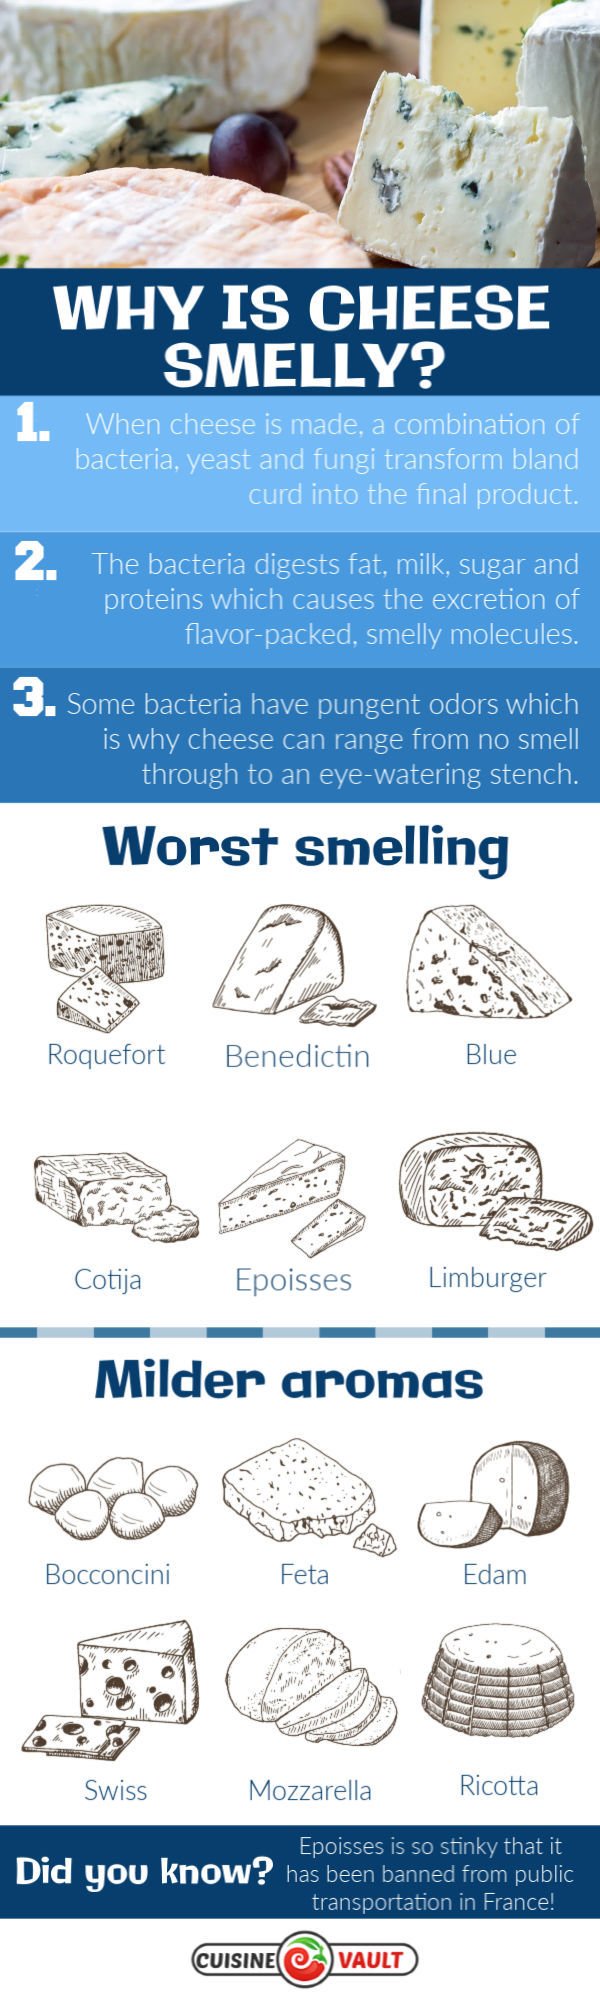 Smelly cheese infographic